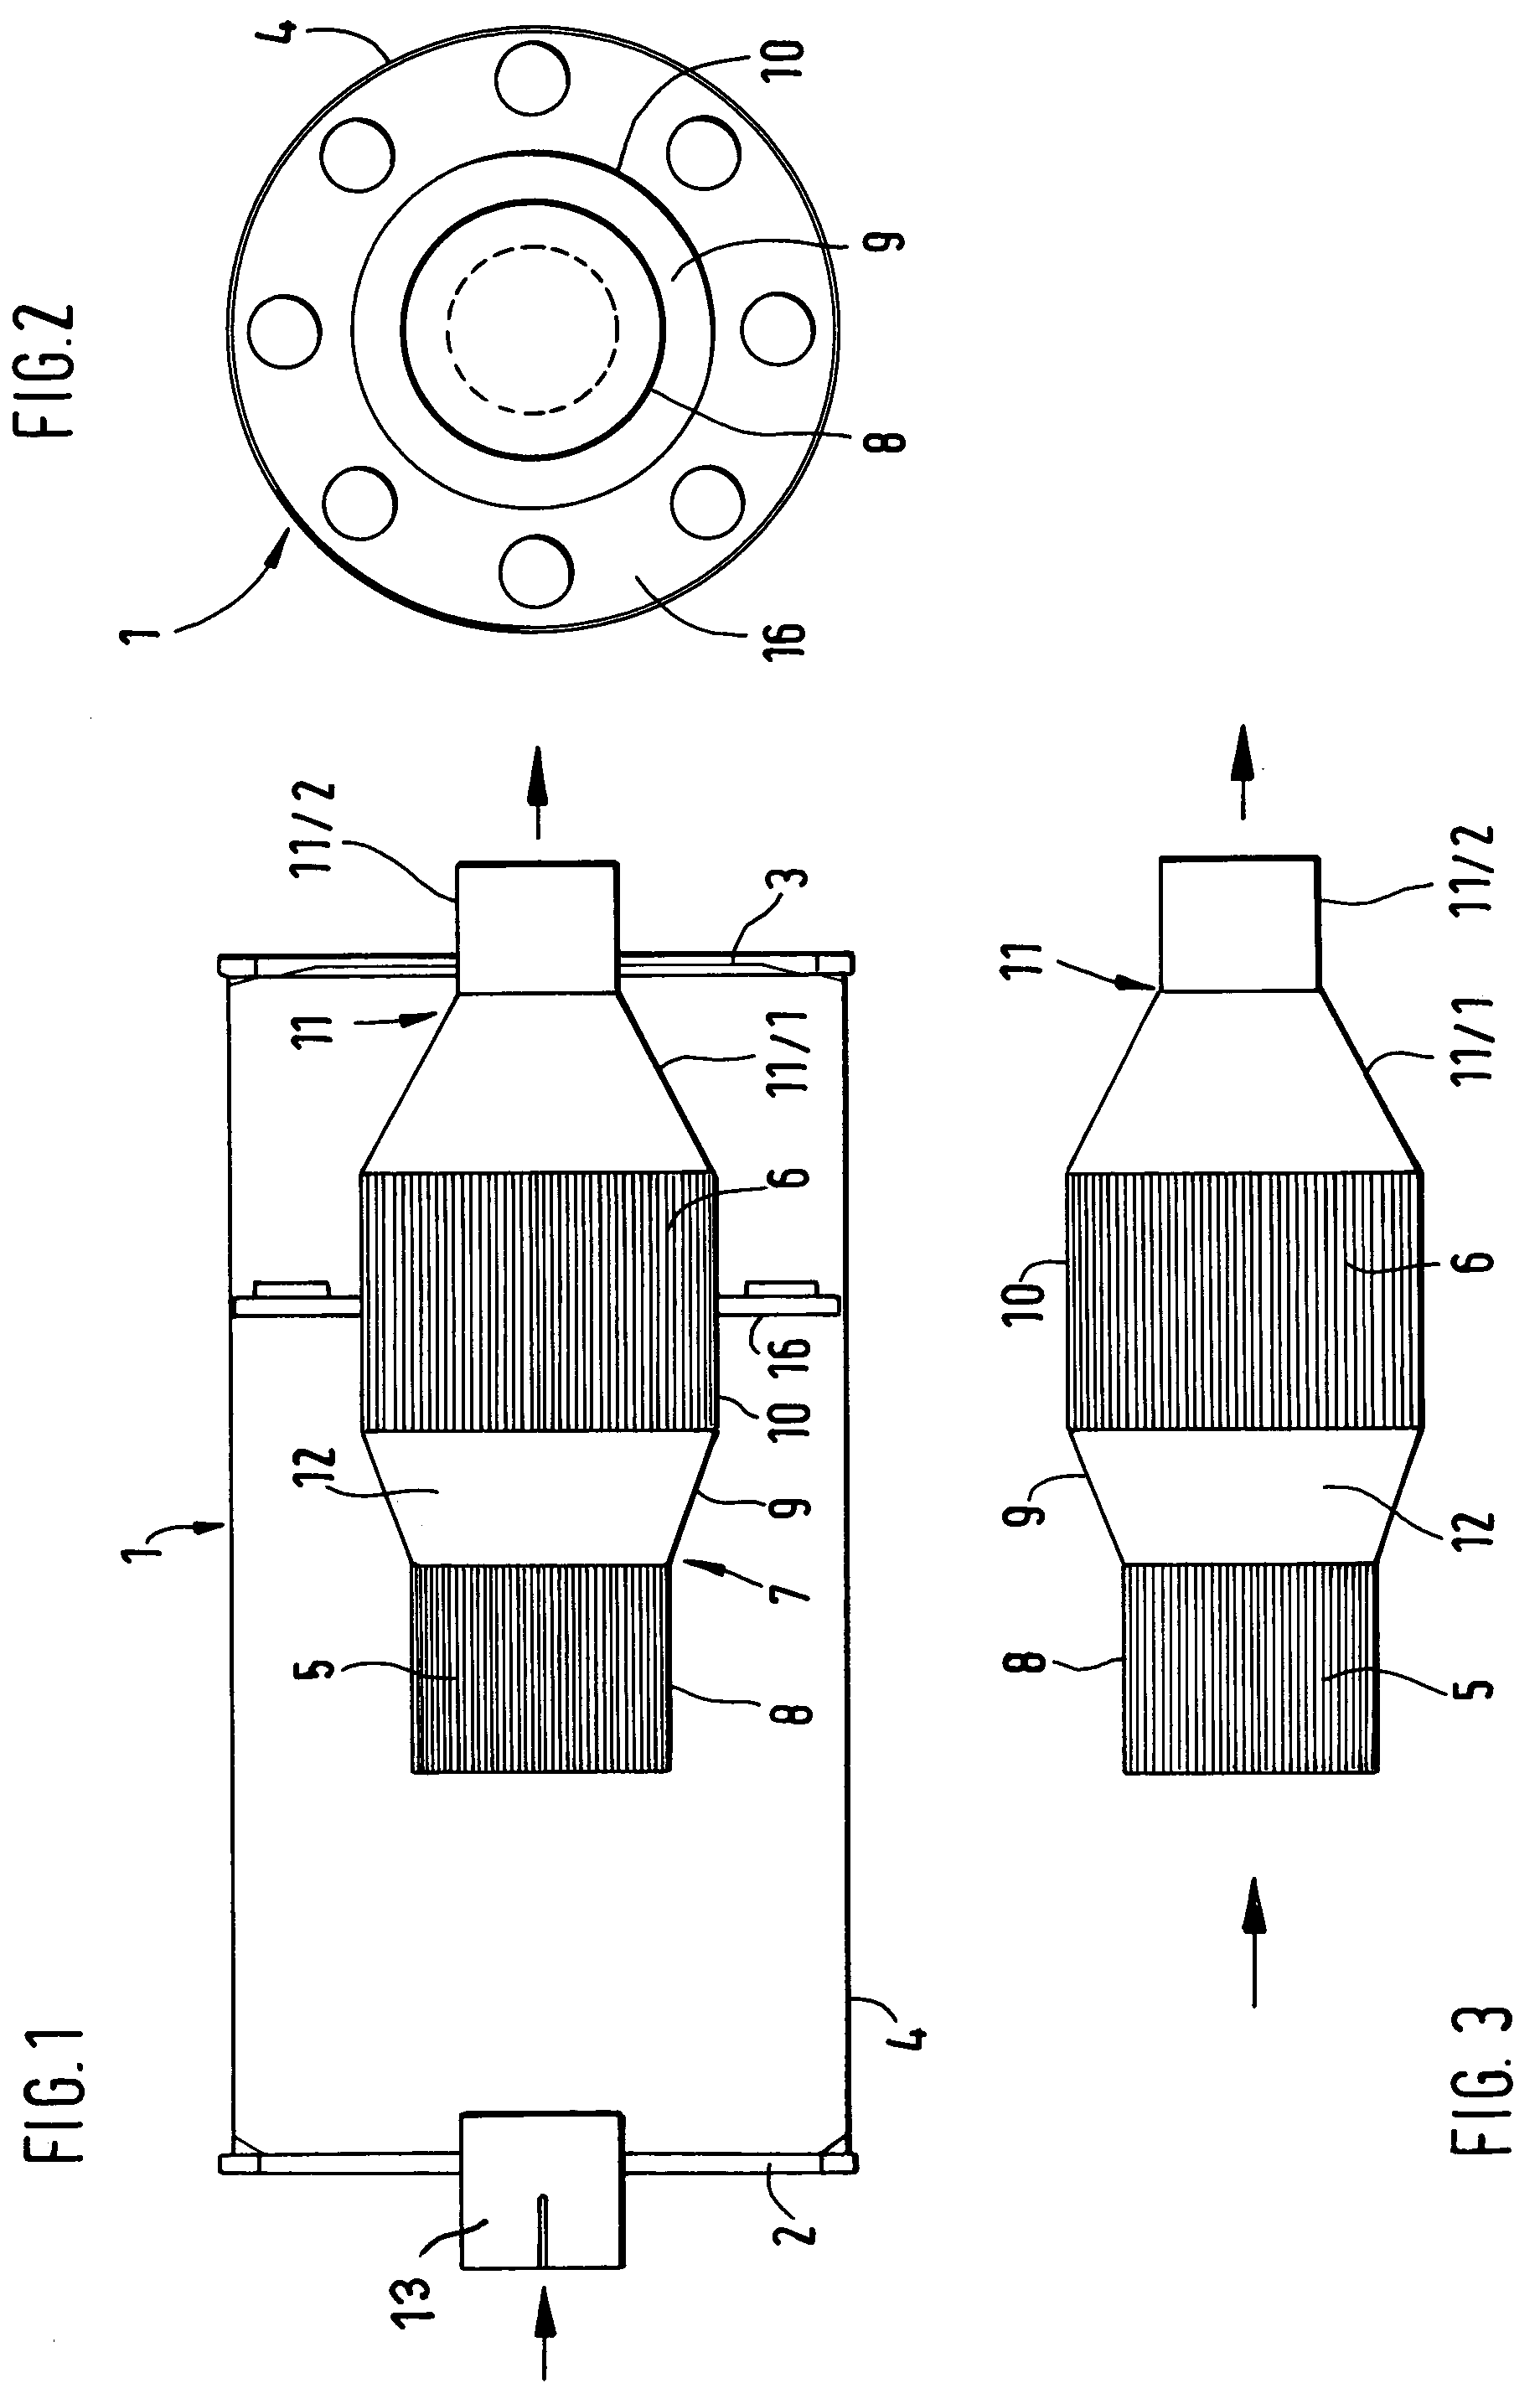 Combination exhaust gas post treatment/muffler device in the exhaust gas section of an internal combustion engine